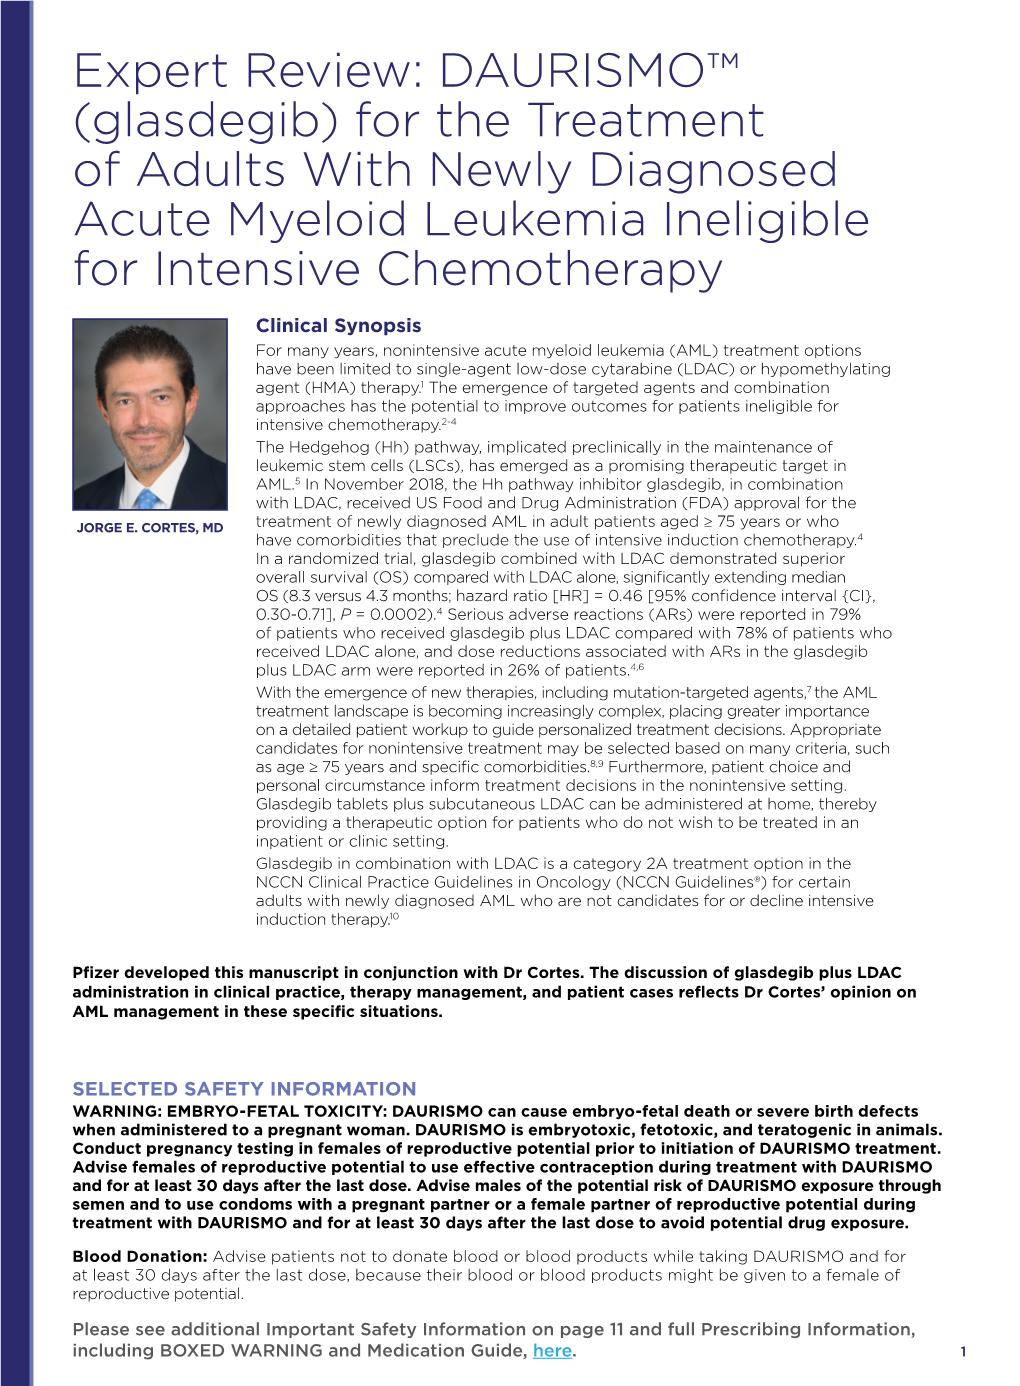 Expert Review: DAURISMO™ (Glasdegib) for the Treatment of Adults with Newly Diagnosed Acute Myeloid Leukemia Ineligible for Intensive Chemotherapy